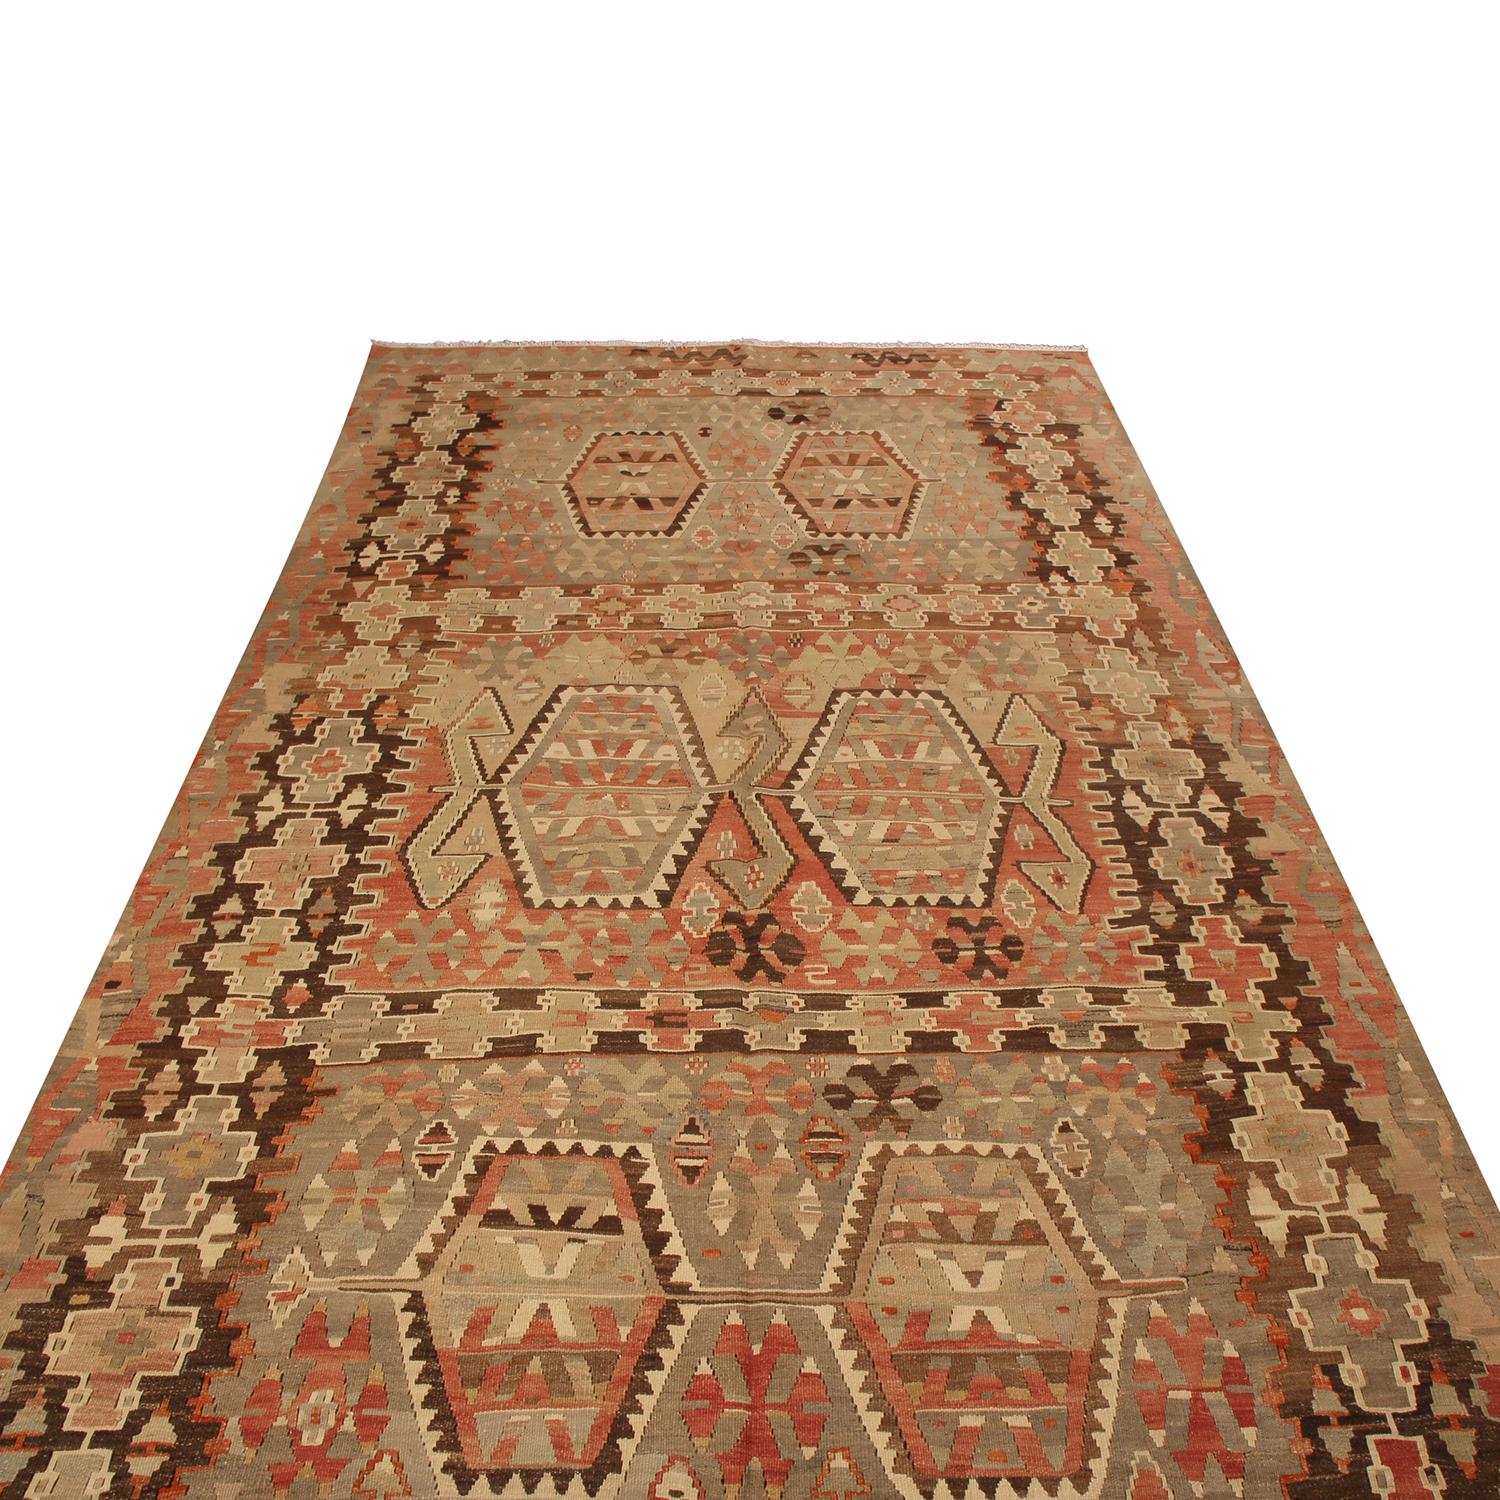 Originating from Turkey between 1940-1950, this vintage Esme wool Kilim rug features a high-quality flat-weave and a unique, vibrant array of field colorways against the beige background, marrying a distinct pageantry of inviting pastels with an